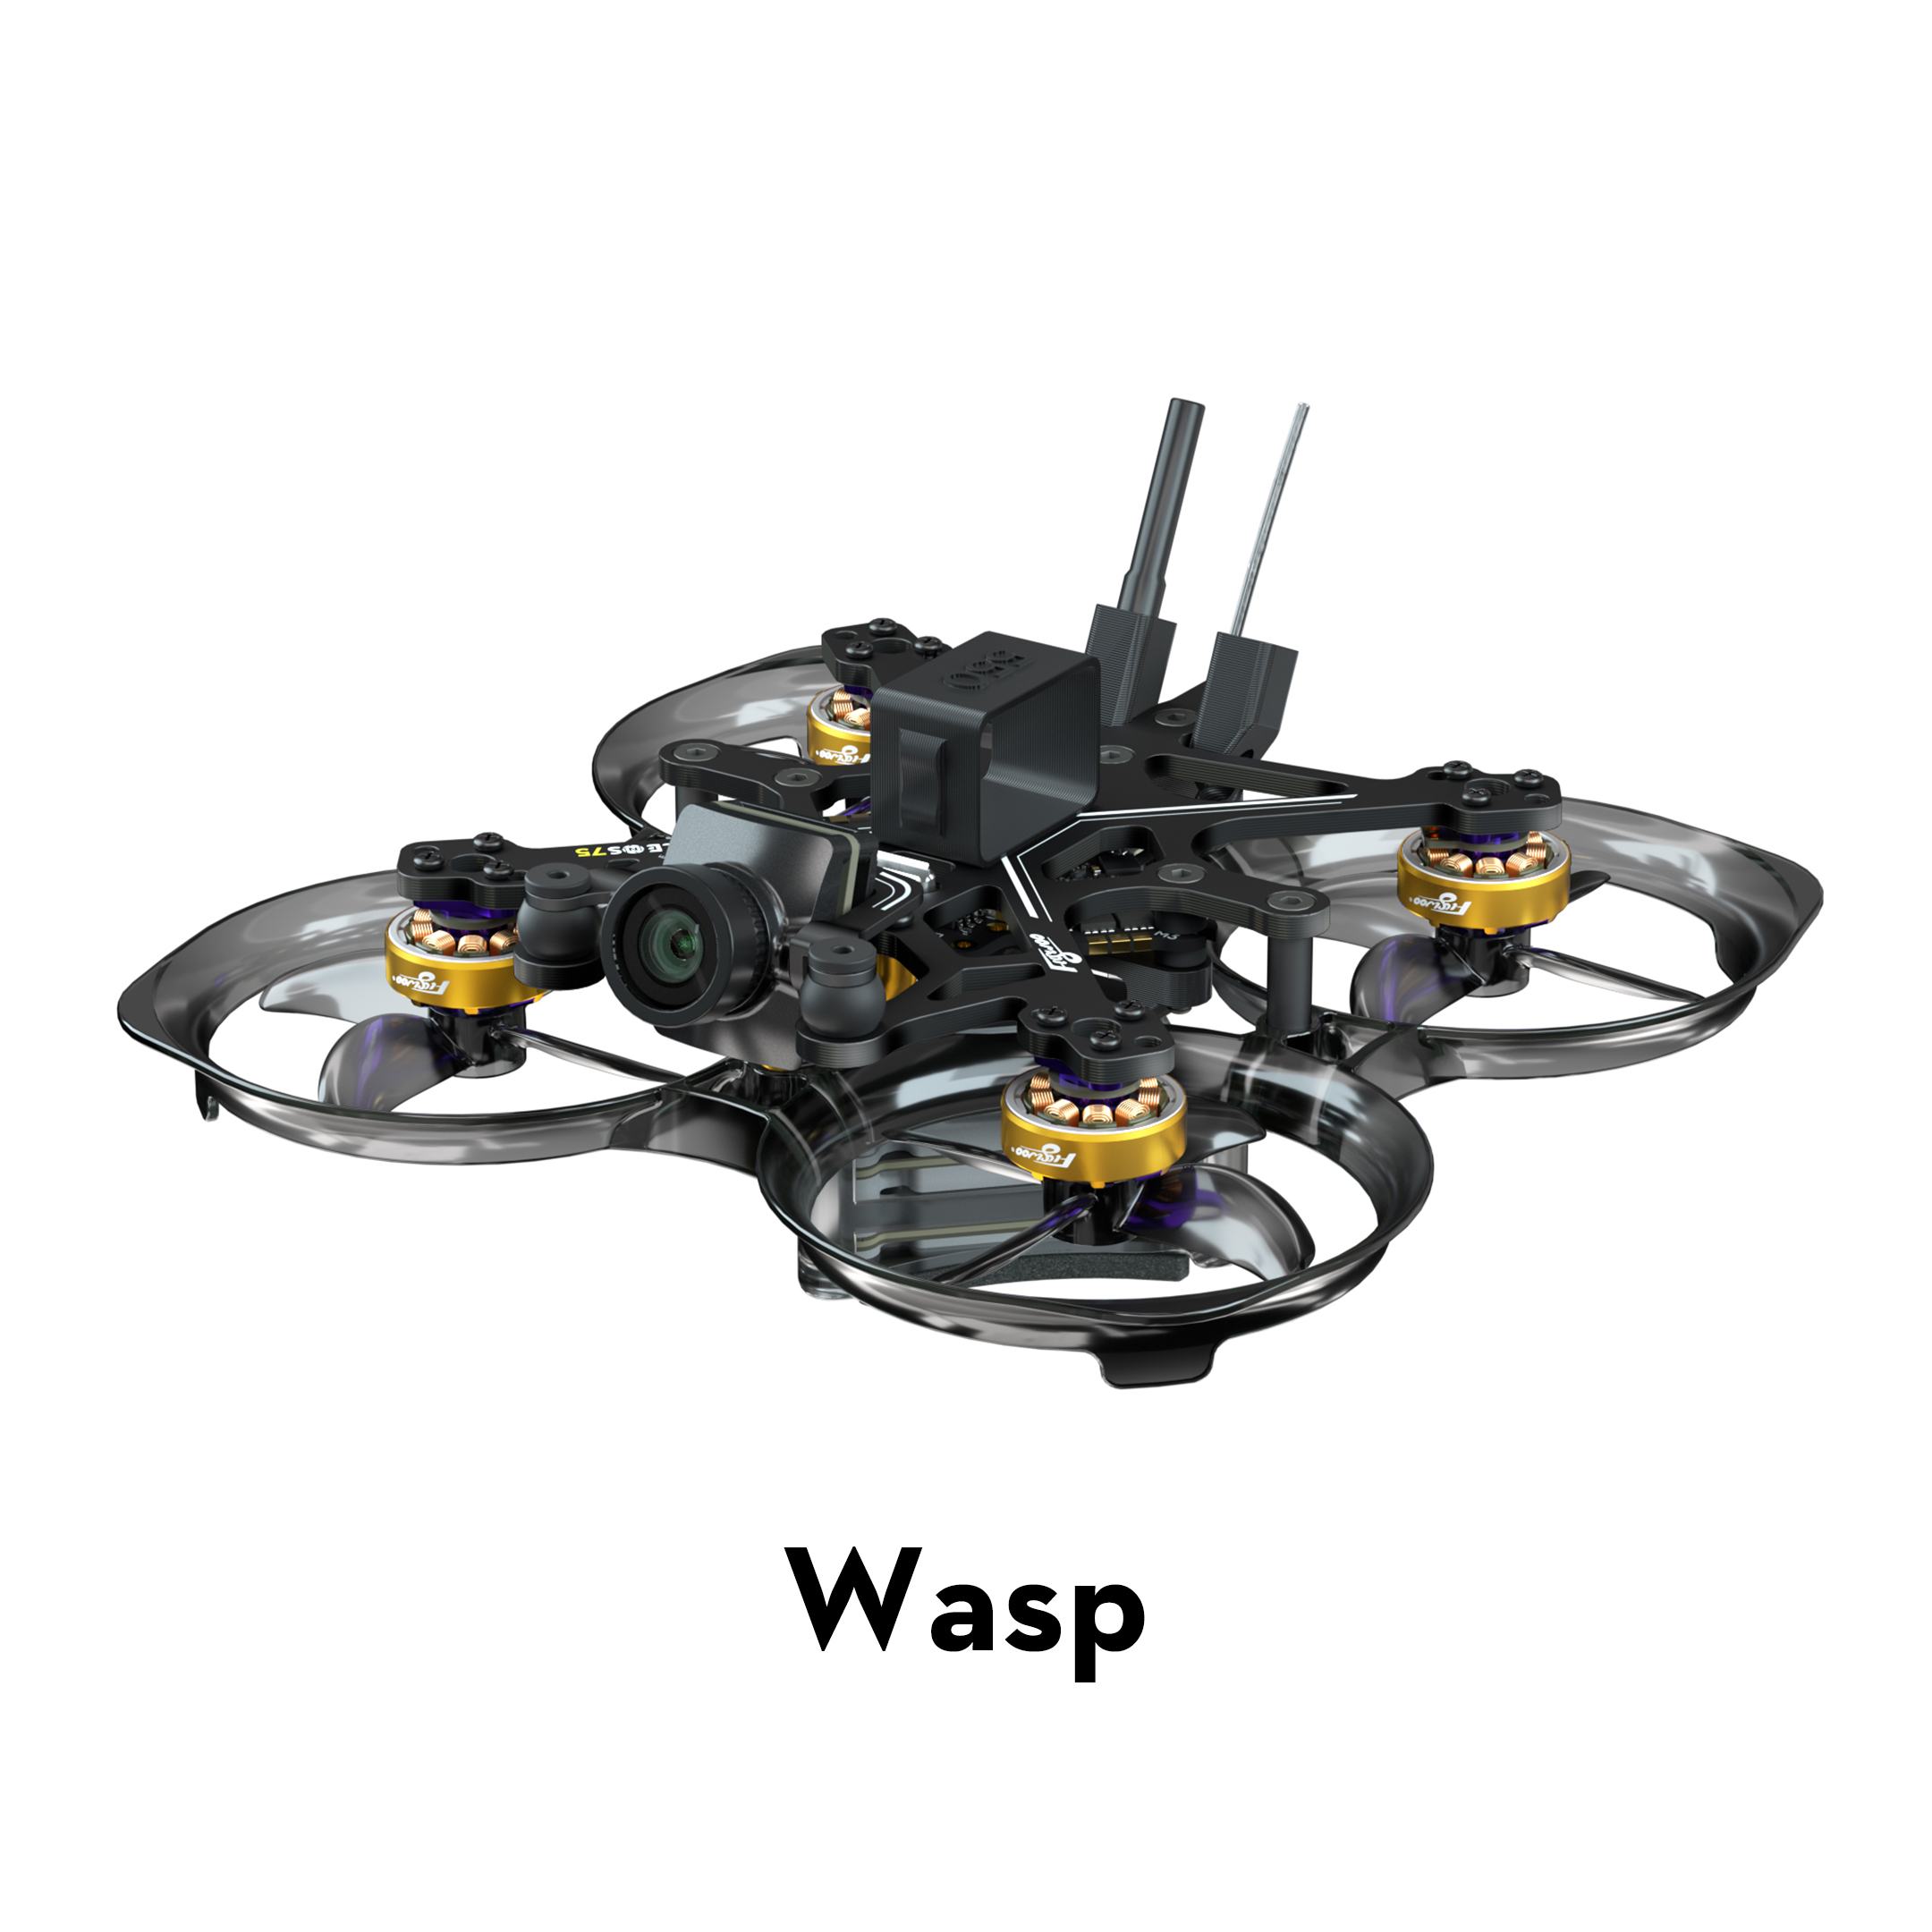 FlyLens 75 HD Wasp 2S Brushless Whoop FPV Drone